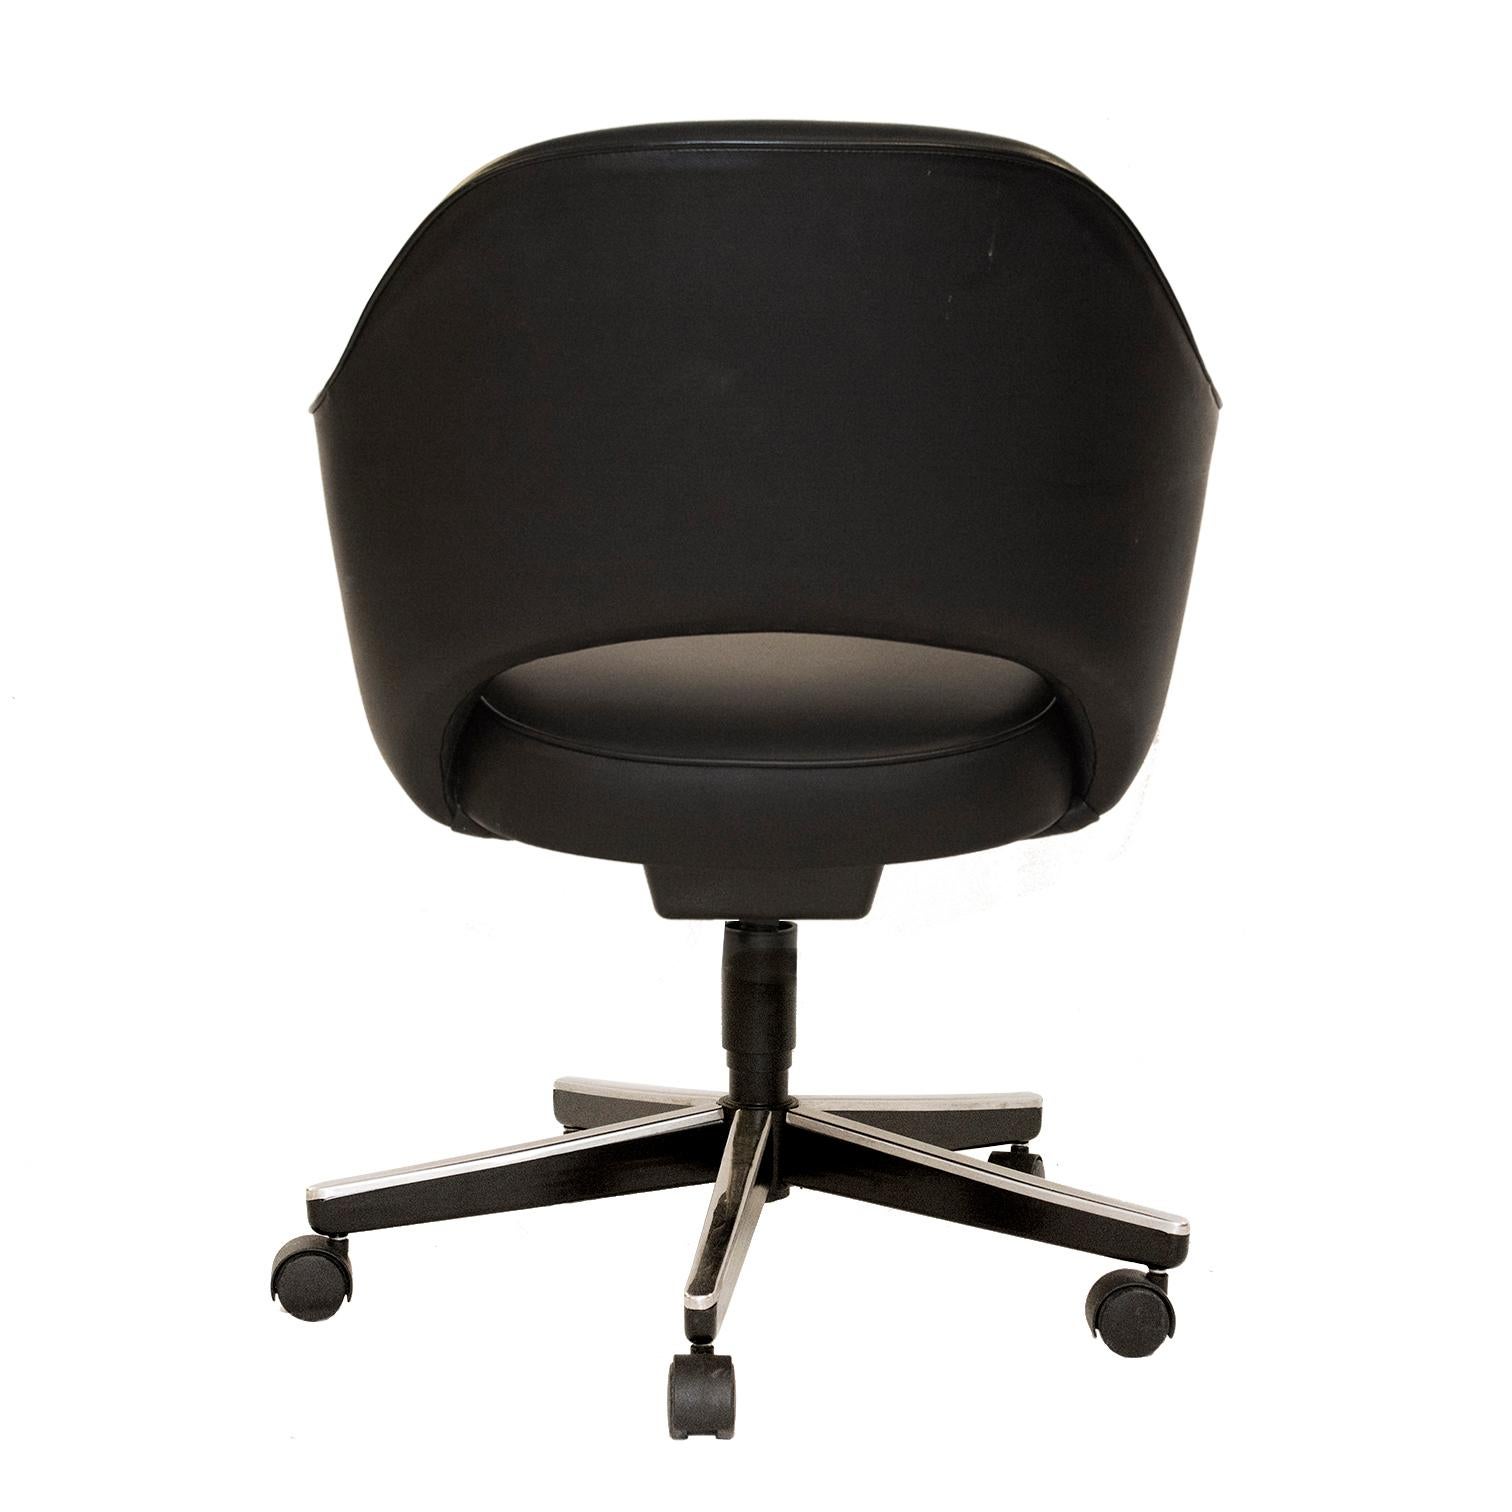 American Saarinen Executive Arm Chair in Original Black Leather, Contemporary Swivel Base For Sale